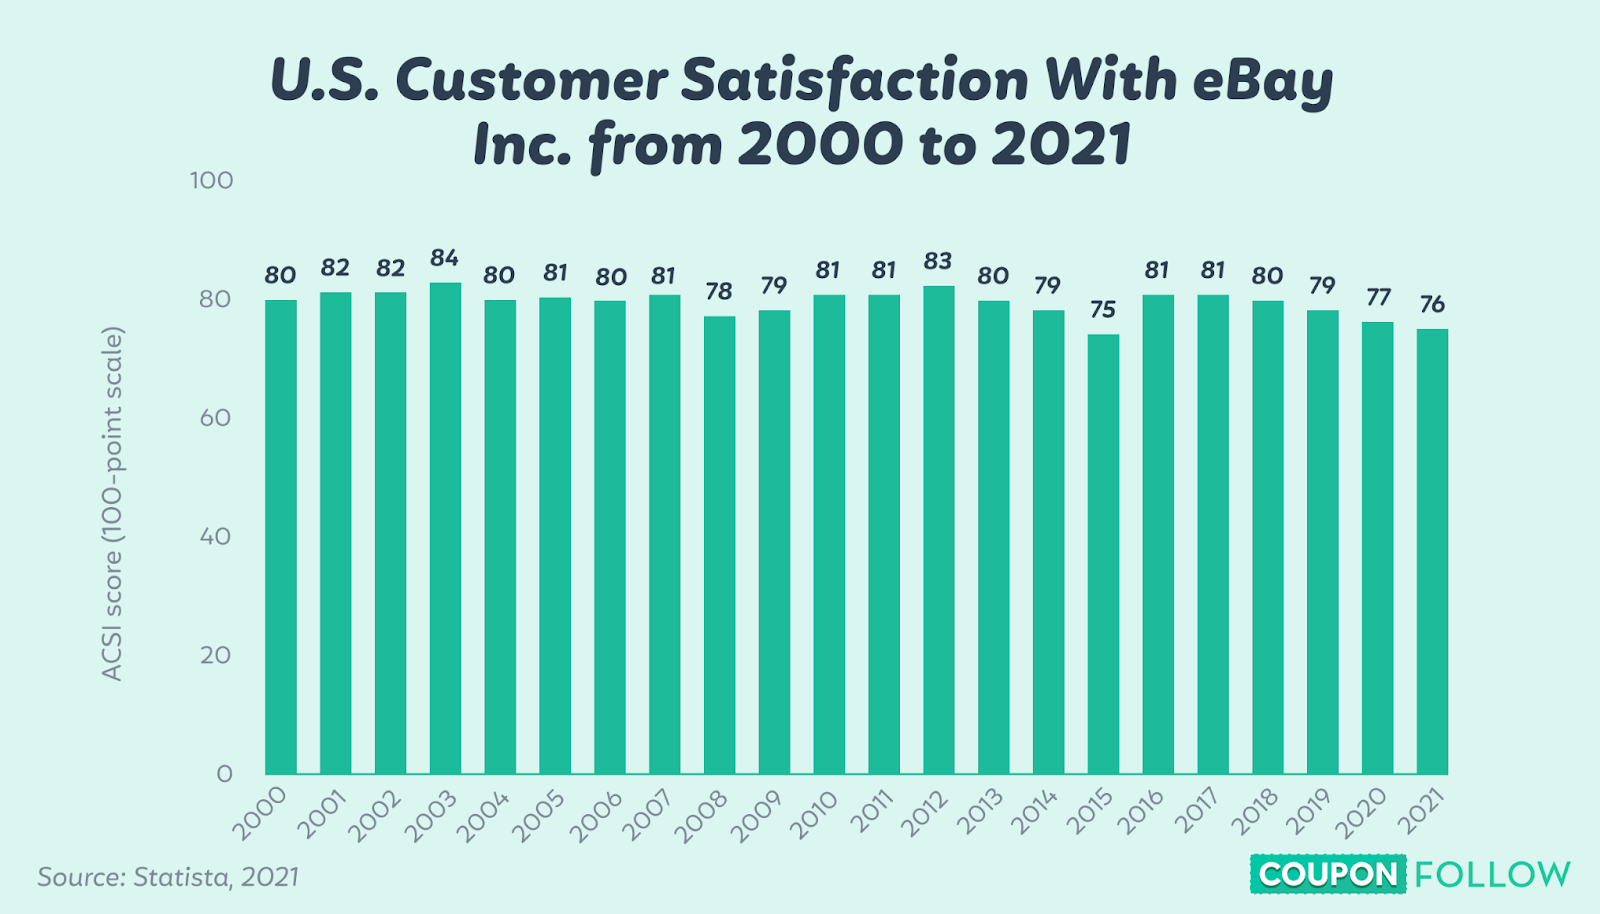 graph showing the customer satisfaction score of eBay’s American customers